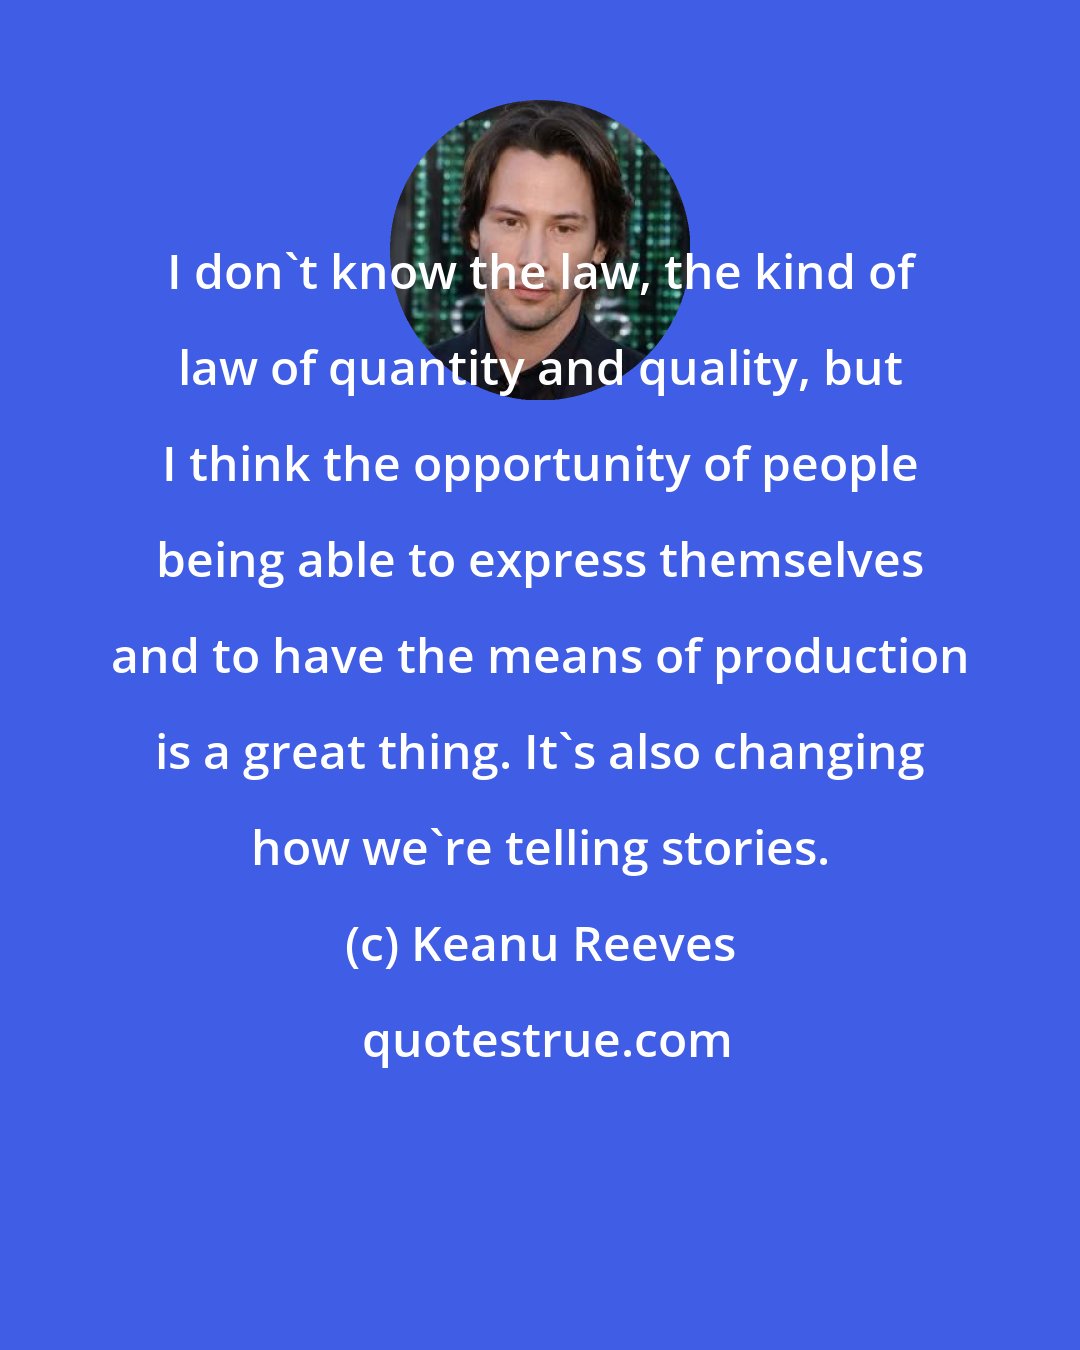 Keanu Reeves: I don't know the law, the kind of law of quantity and quality, but I think the opportunity of people being able to express themselves and to have the means of production is a great thing. It's also changing how we're telling stories.